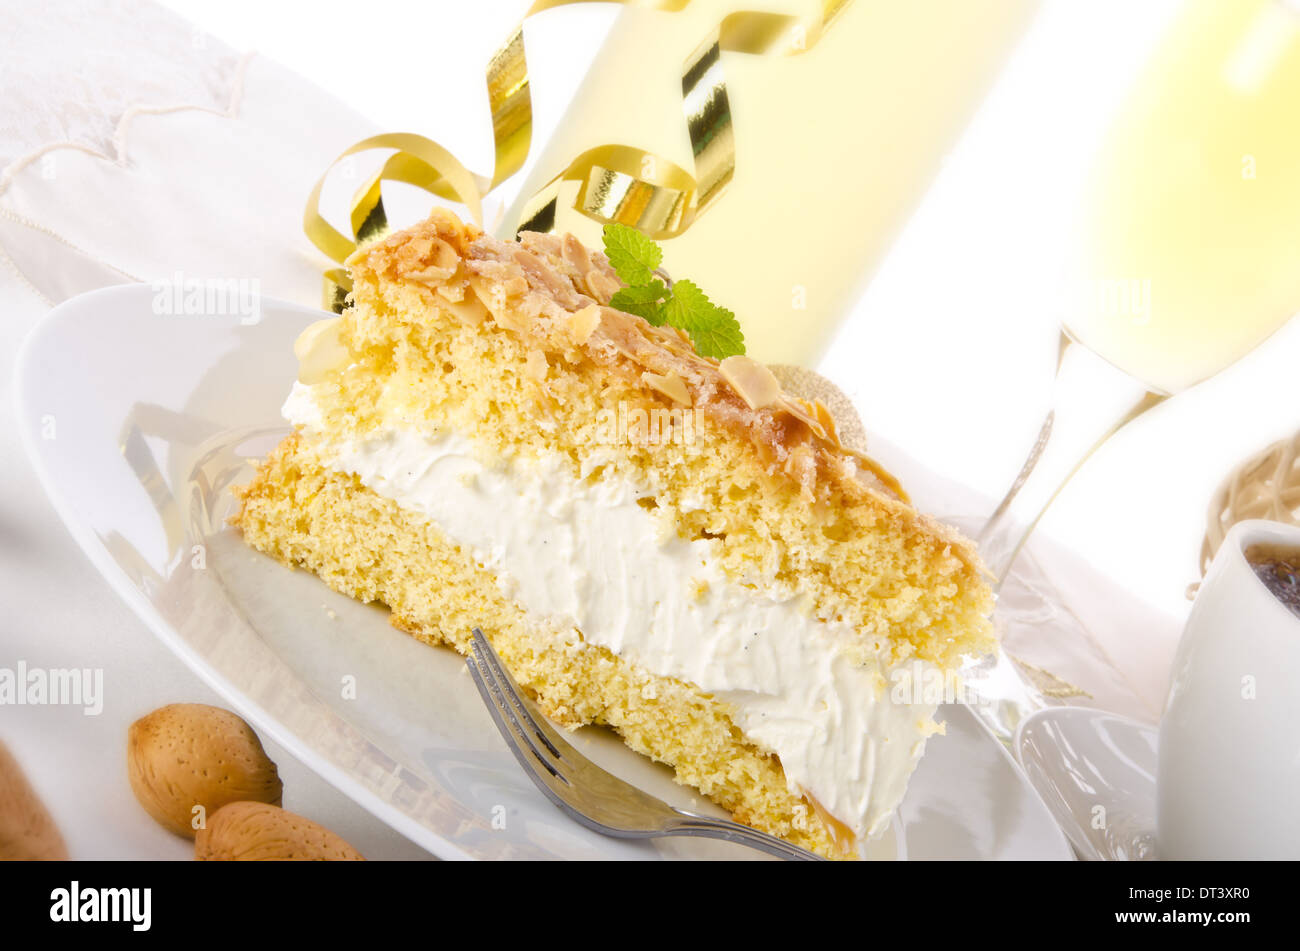 flat cake with an almond and sugar coating Stock Photo